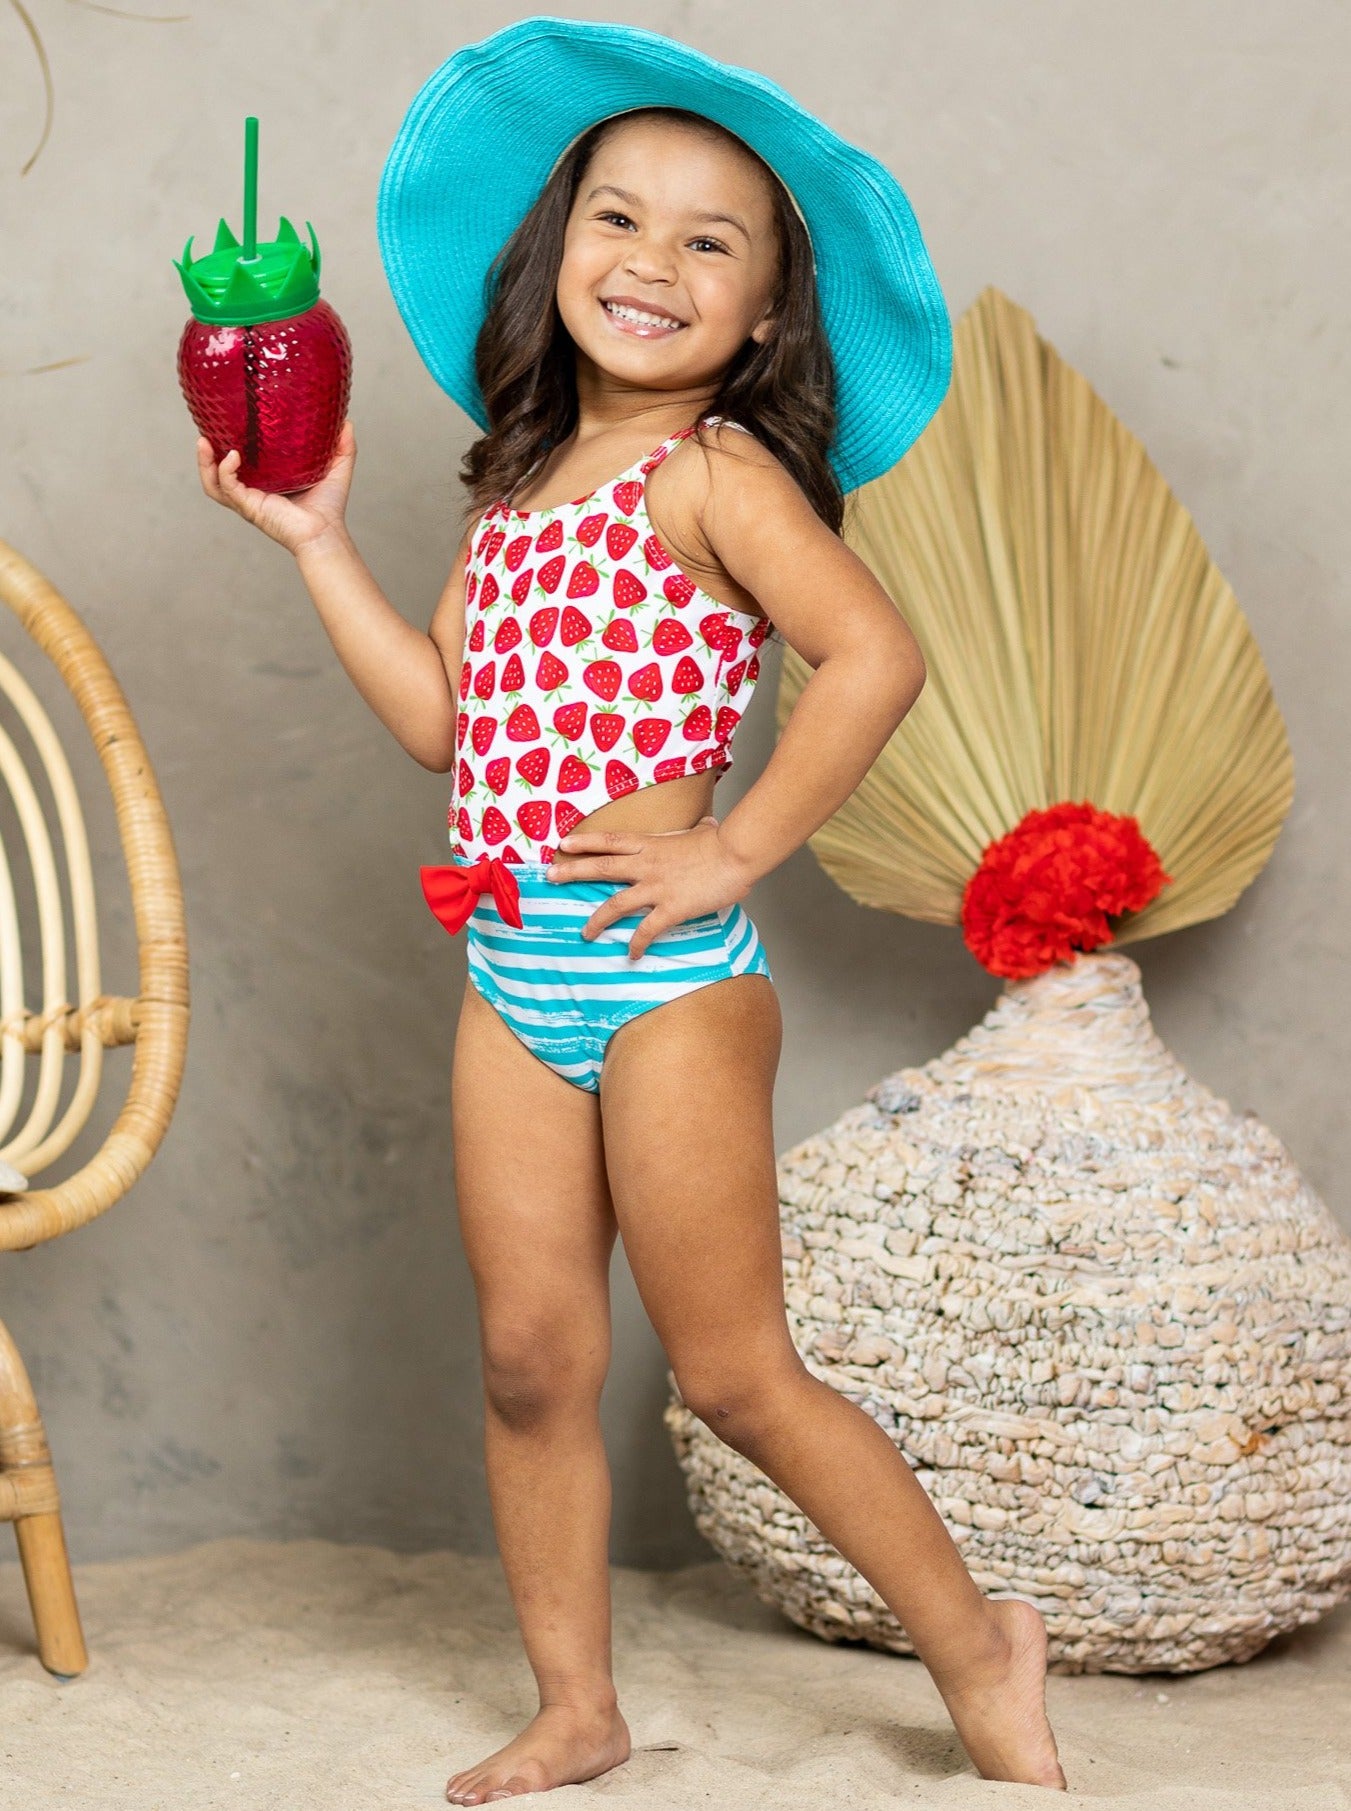 One-piece open-side swimsuit with strawberry print top and striped print bottoms and a red bow - Girls One-Piece Swimsuit